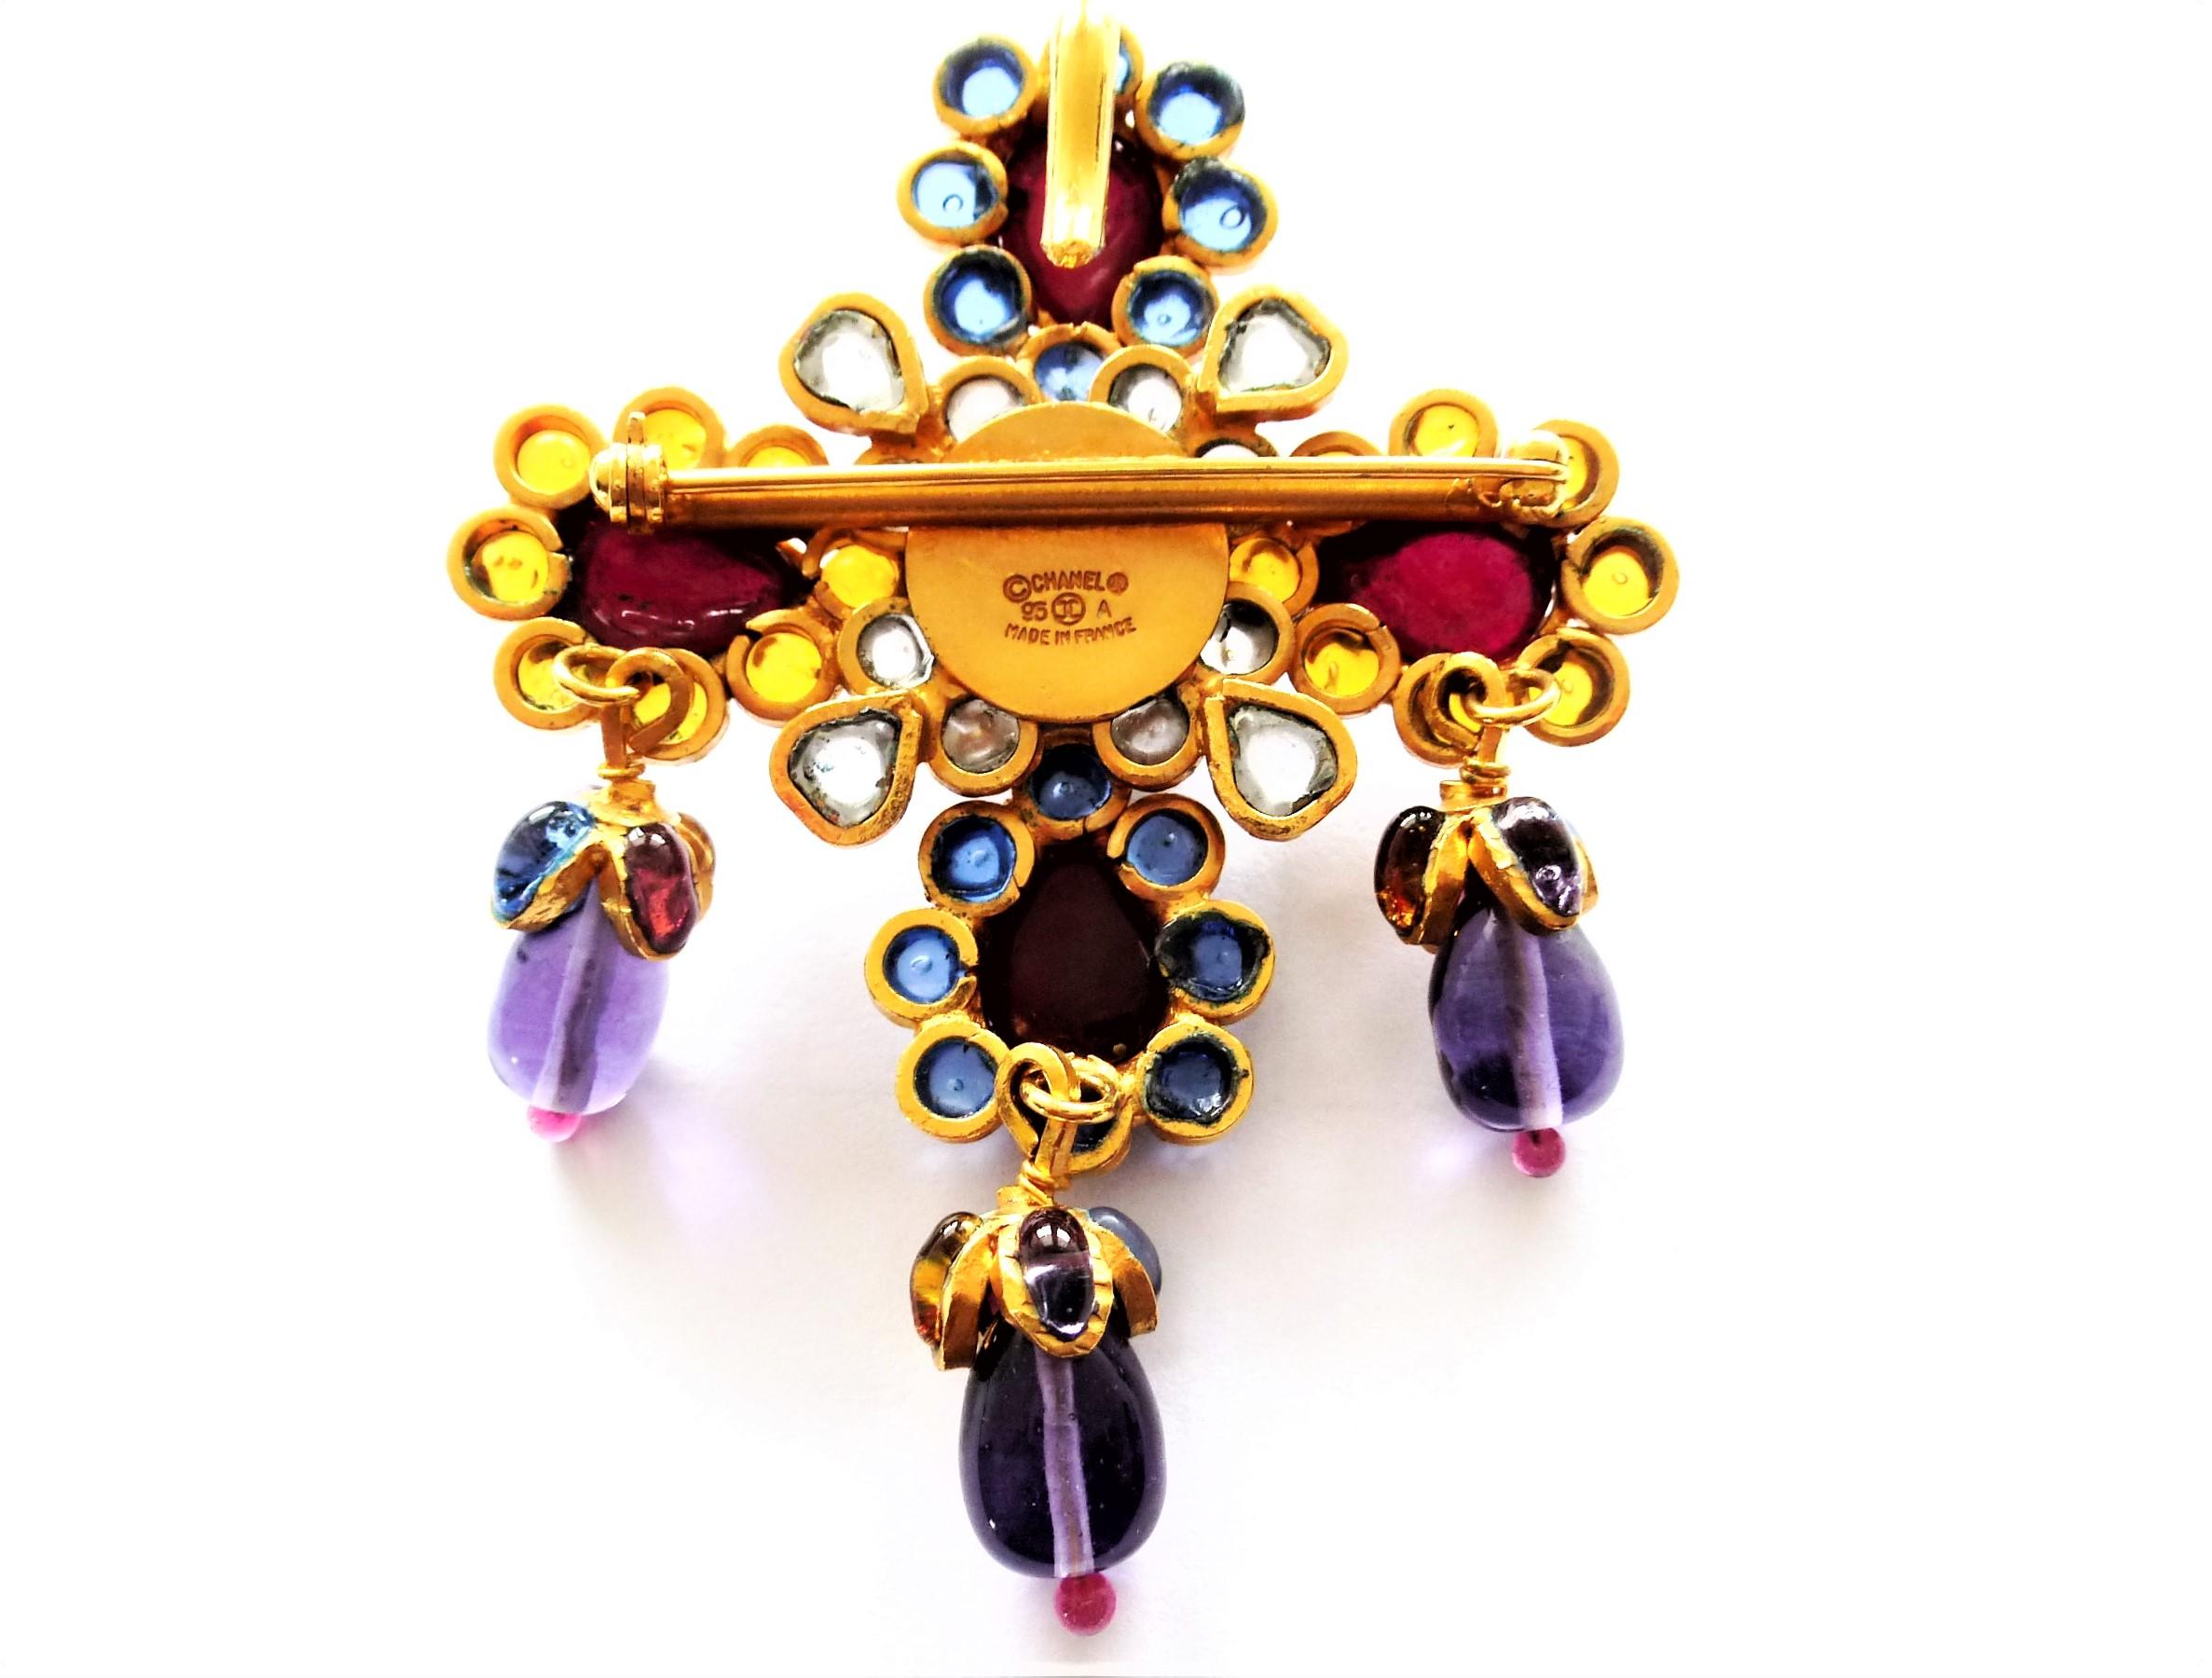 A wonderful Chanel brooch, also to wear as a pendant, from Gripoix. The metal work of Robert Goossens Paris and each blossom and the drops are filled with liquid glass in blue, yellow, purple, red and clear from the Maison of Gripoix. The brooch is